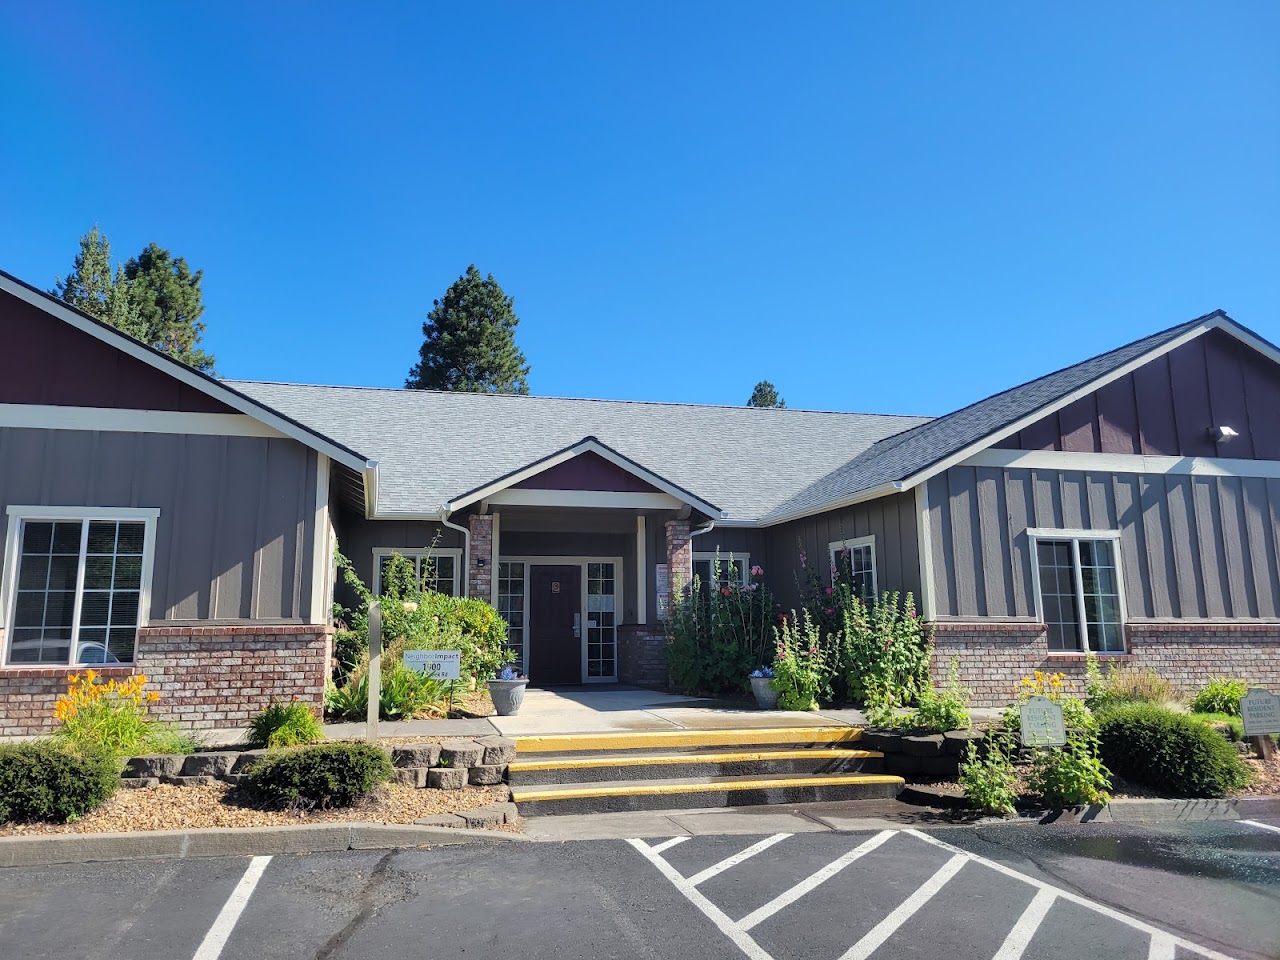 Photo of HEALY HEIGHTS. Affordable housing located at 1900 NE BEAR CREEK RD BEND, OR 97701